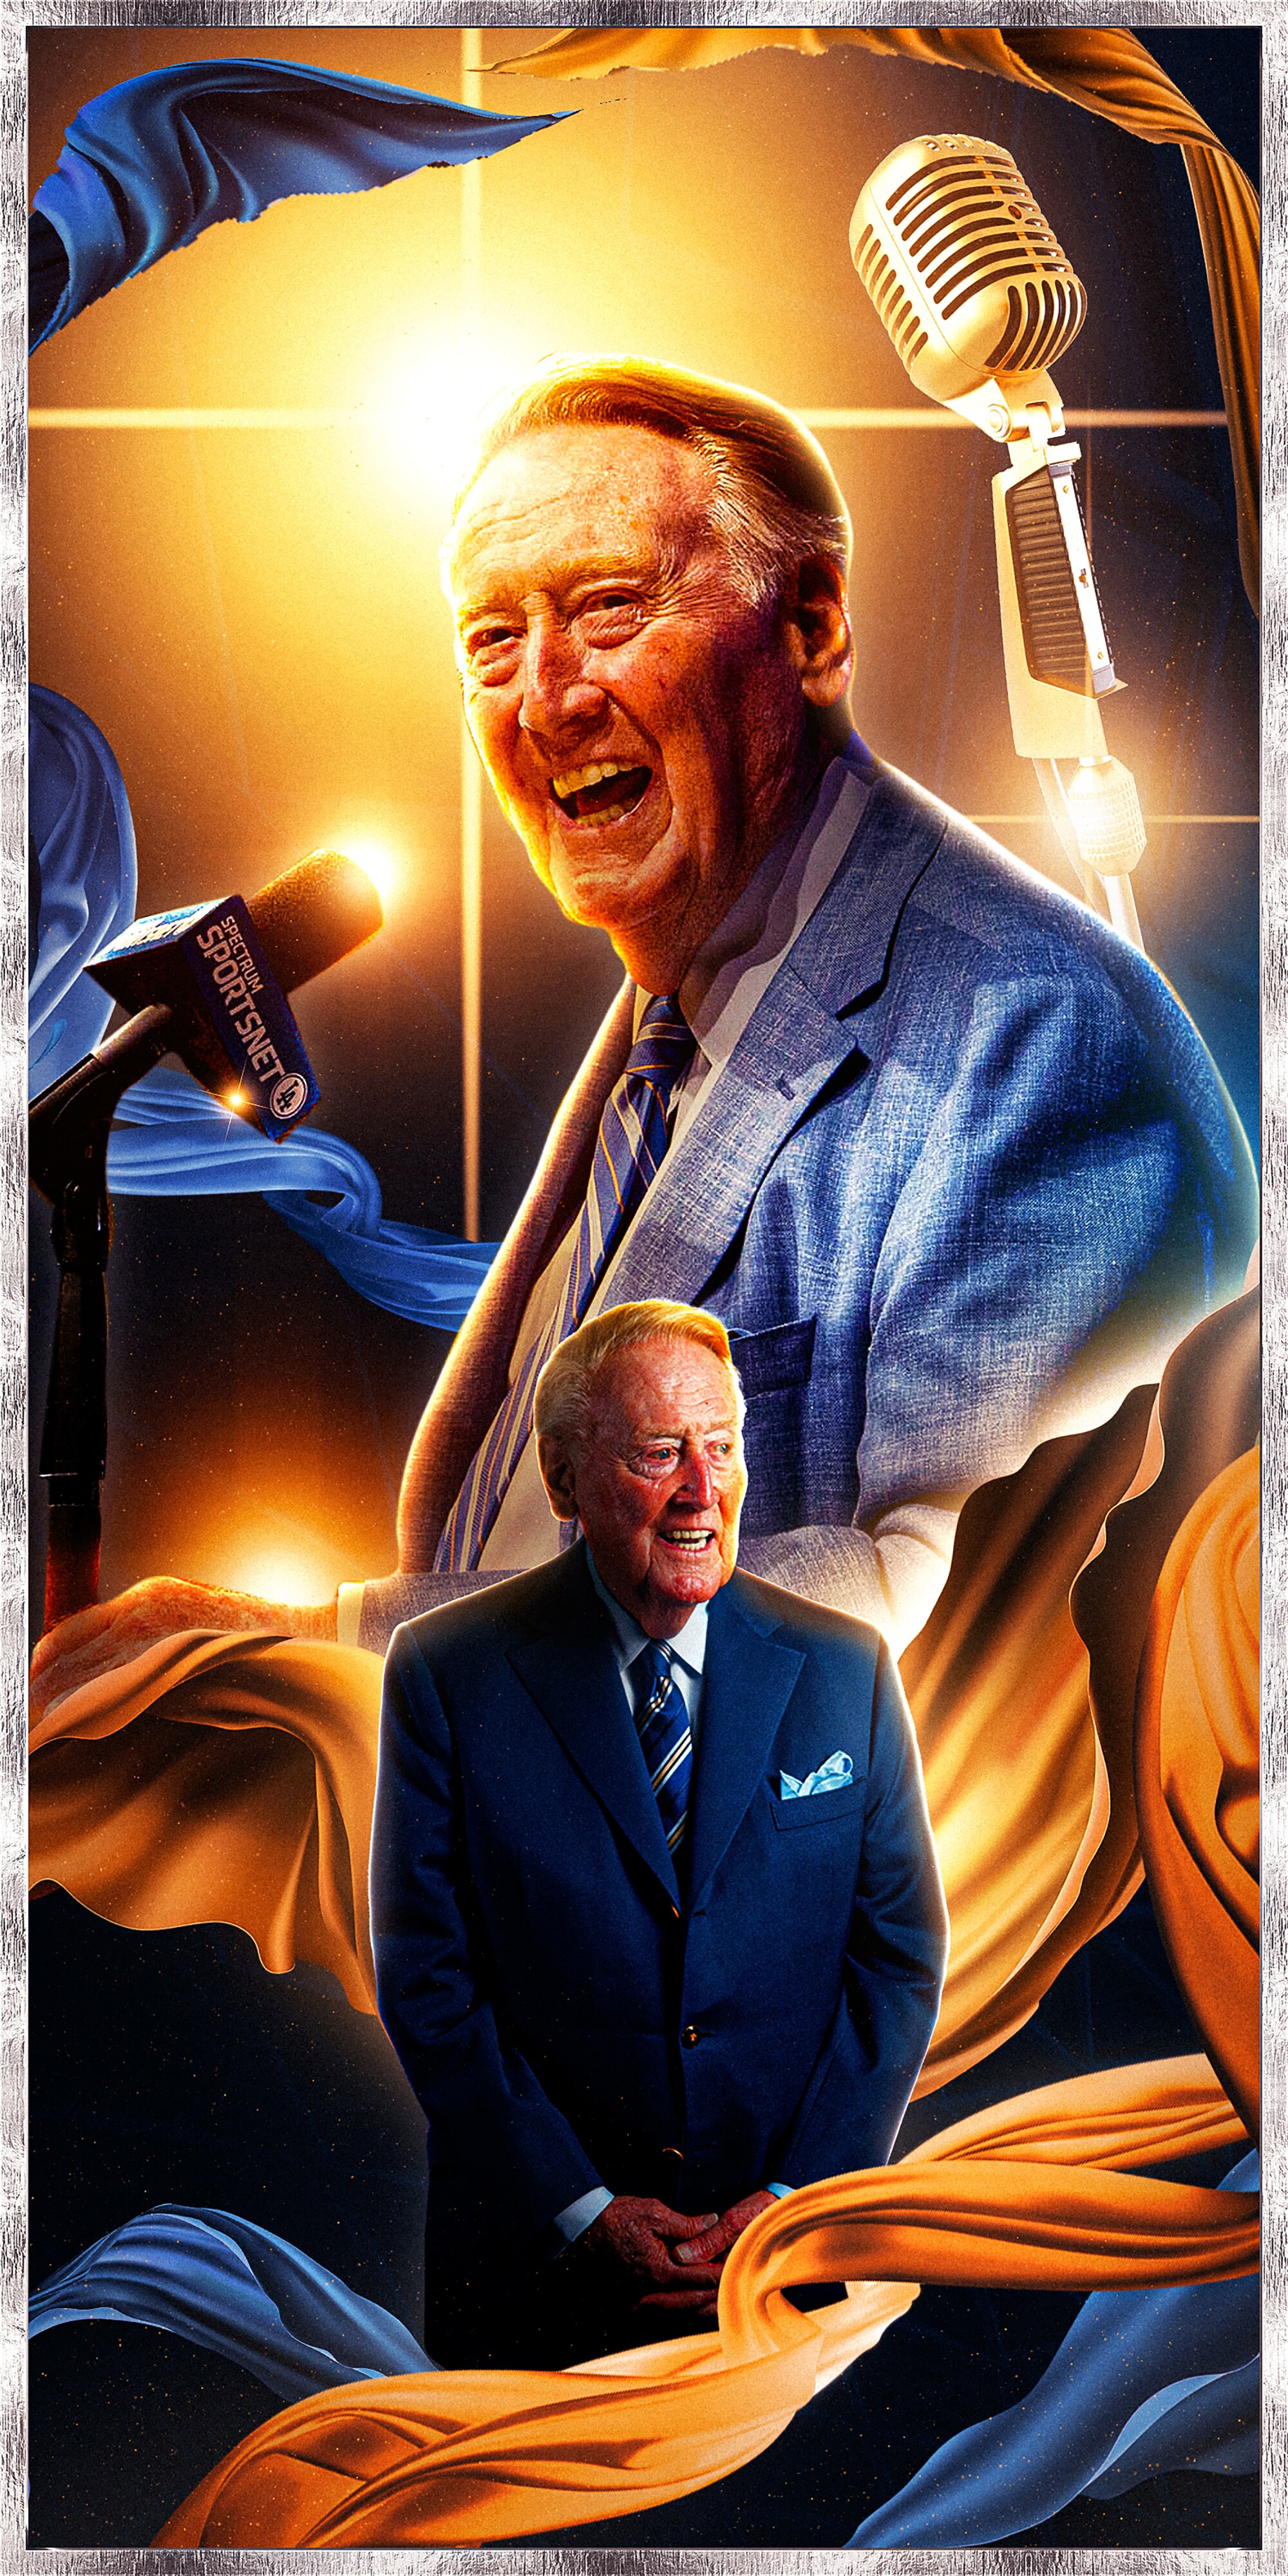 Illustration of two portraits of Vin Scully, one of him smiling widely and one of him standing, backlit by spotlights.